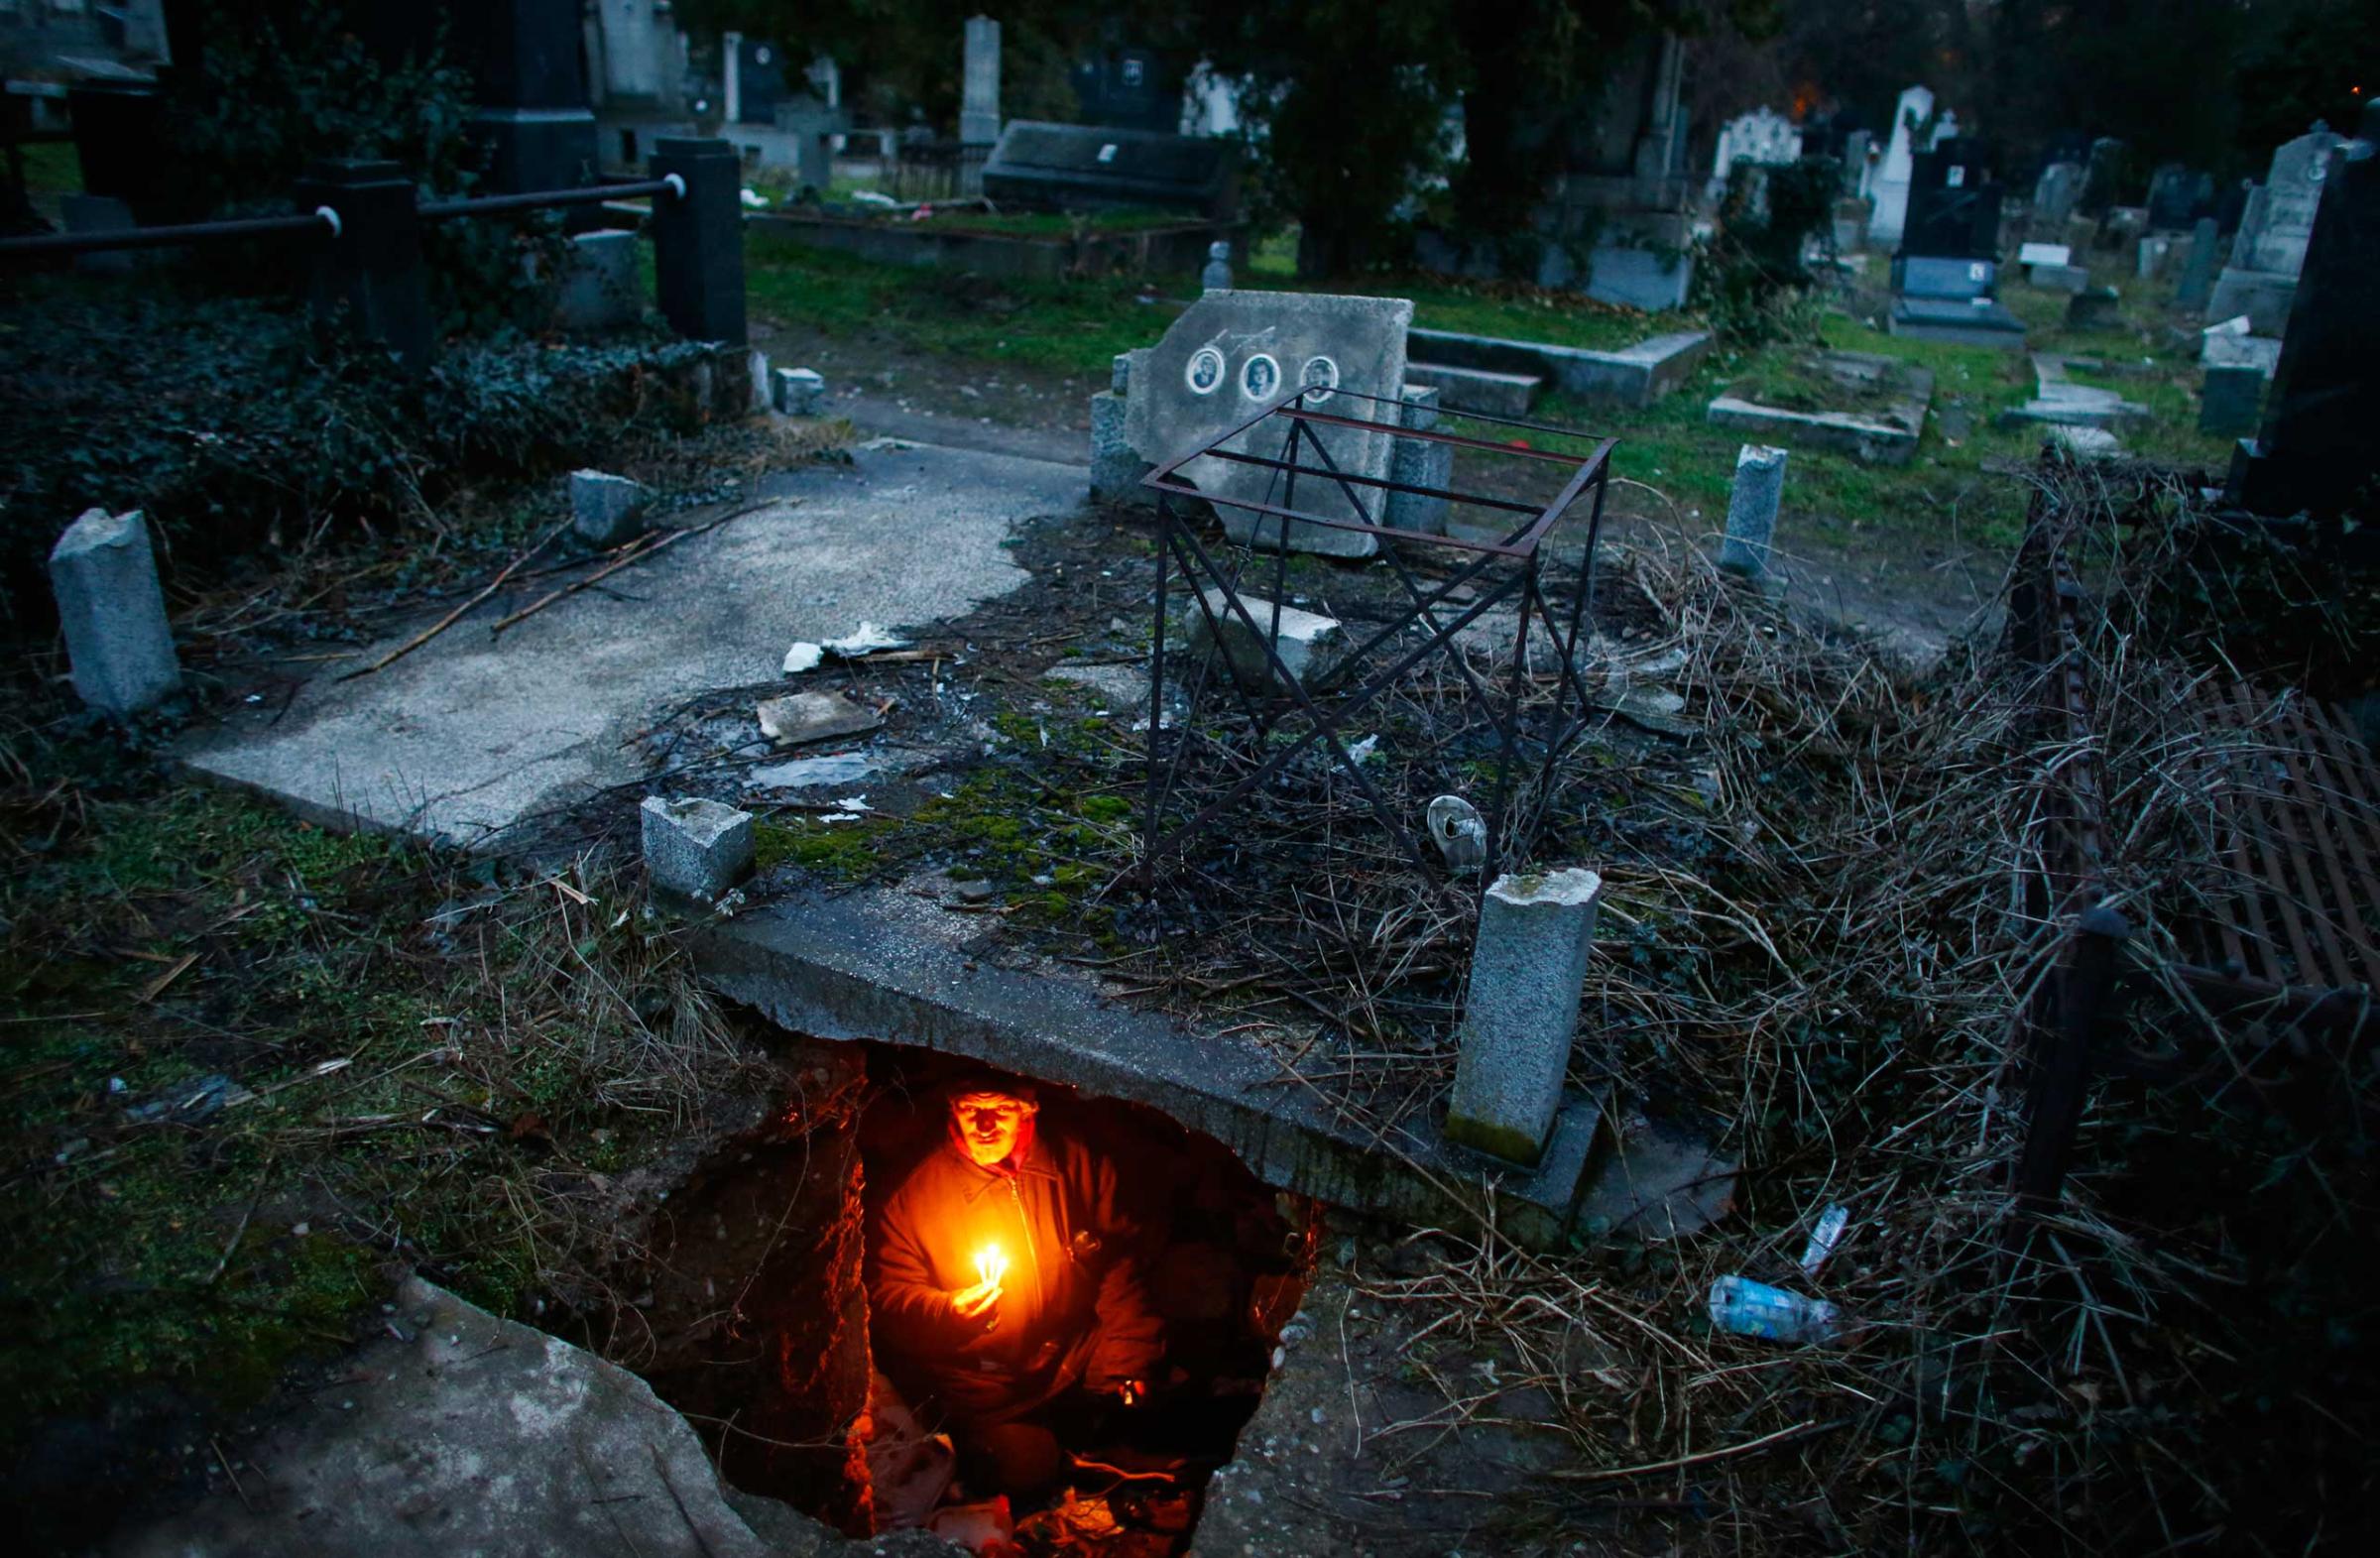 Bratislav Stojanovic, a homeless man, hold candles as he sits in a tomb where he lives in southern Serbian town of Nis